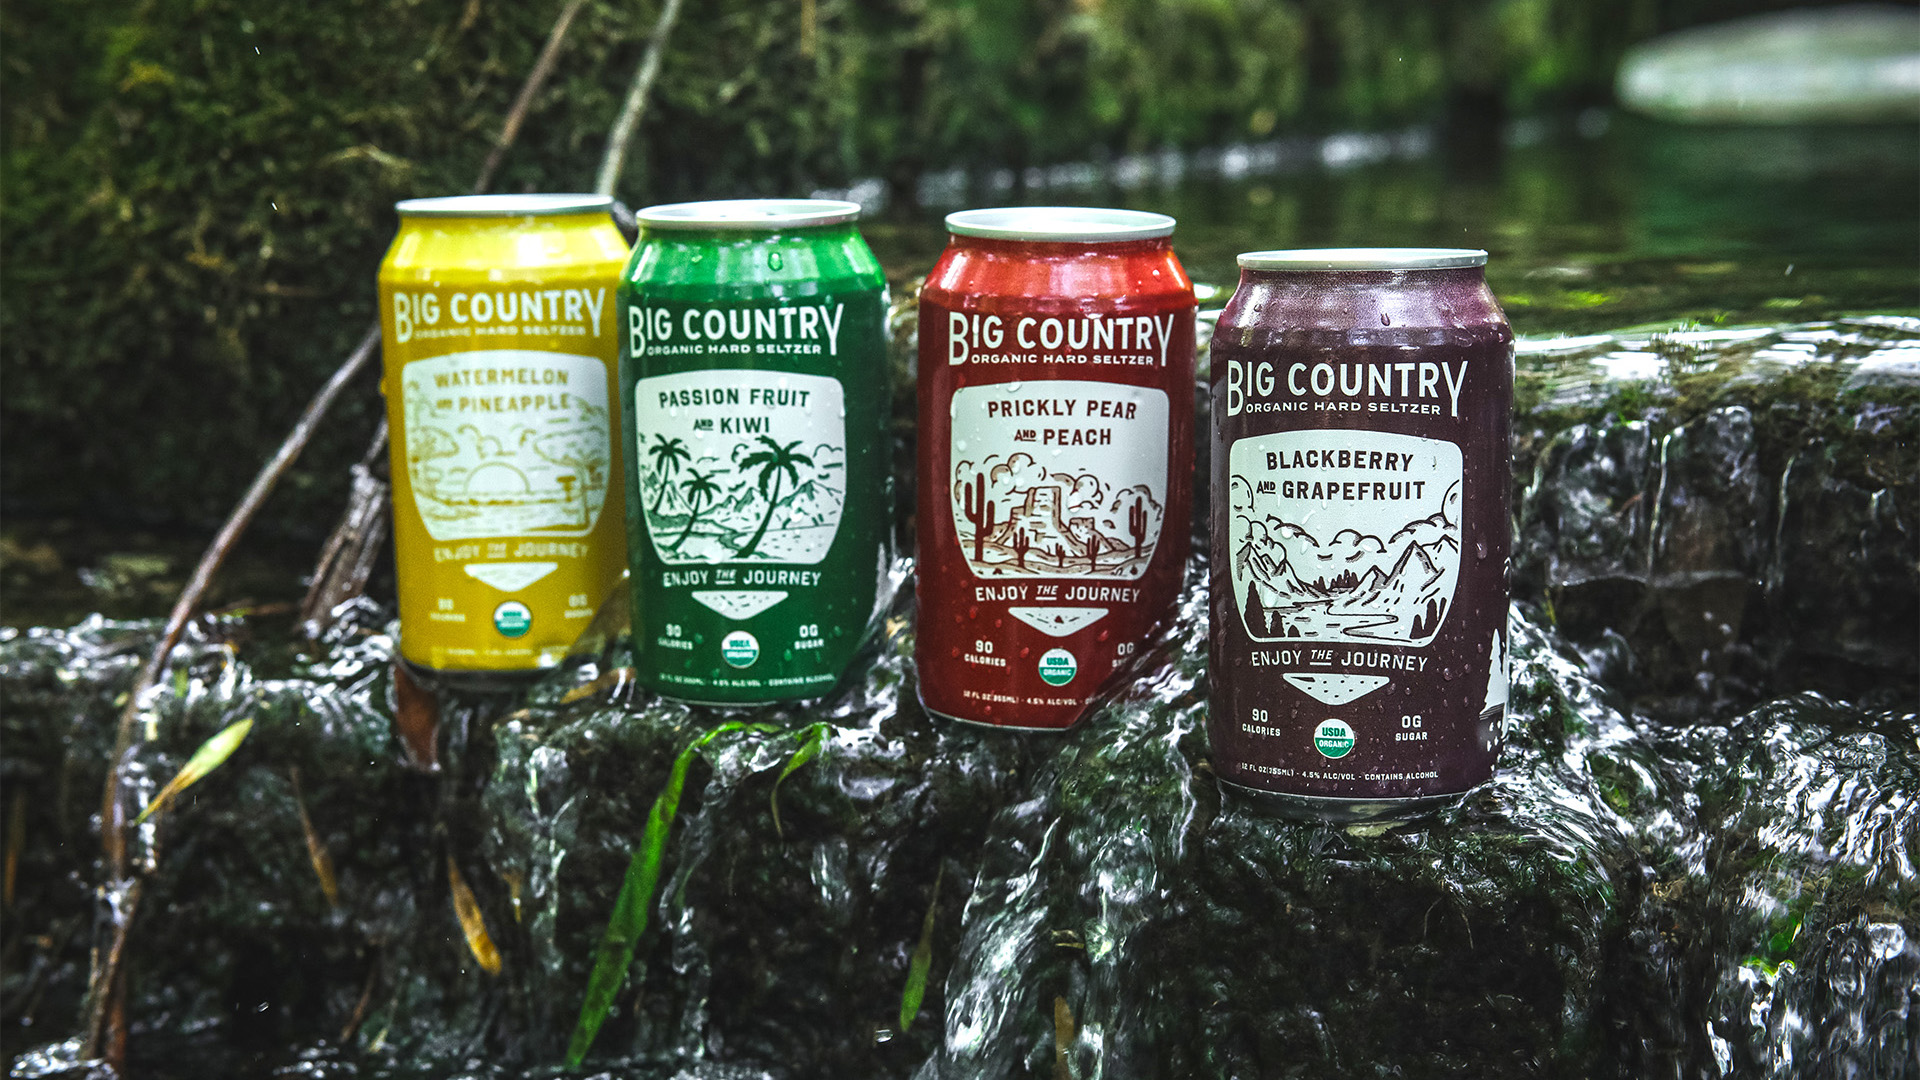 Big Country Organic Brewing Co. relies on Dropbox products to keep its social media effervescent